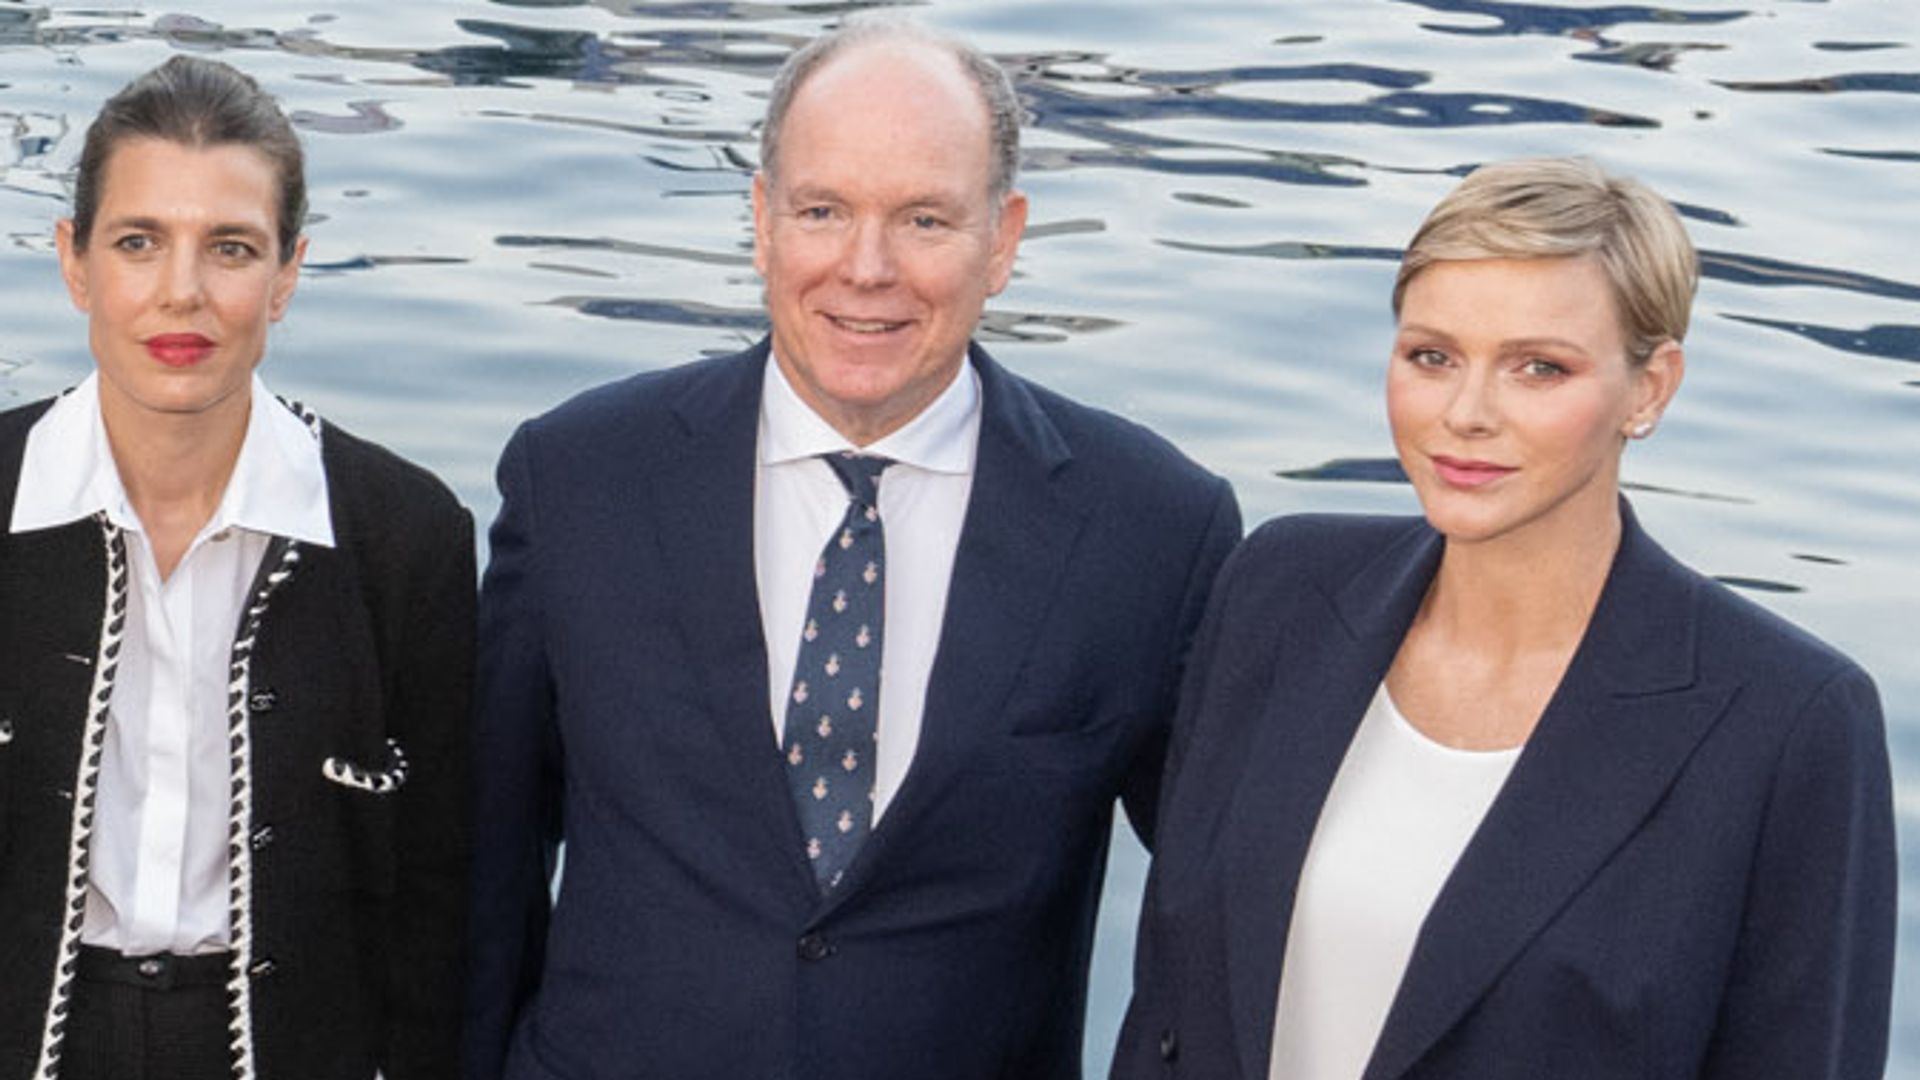 Princess Charlene joins forces with Charlotte Casiraghi for special outing